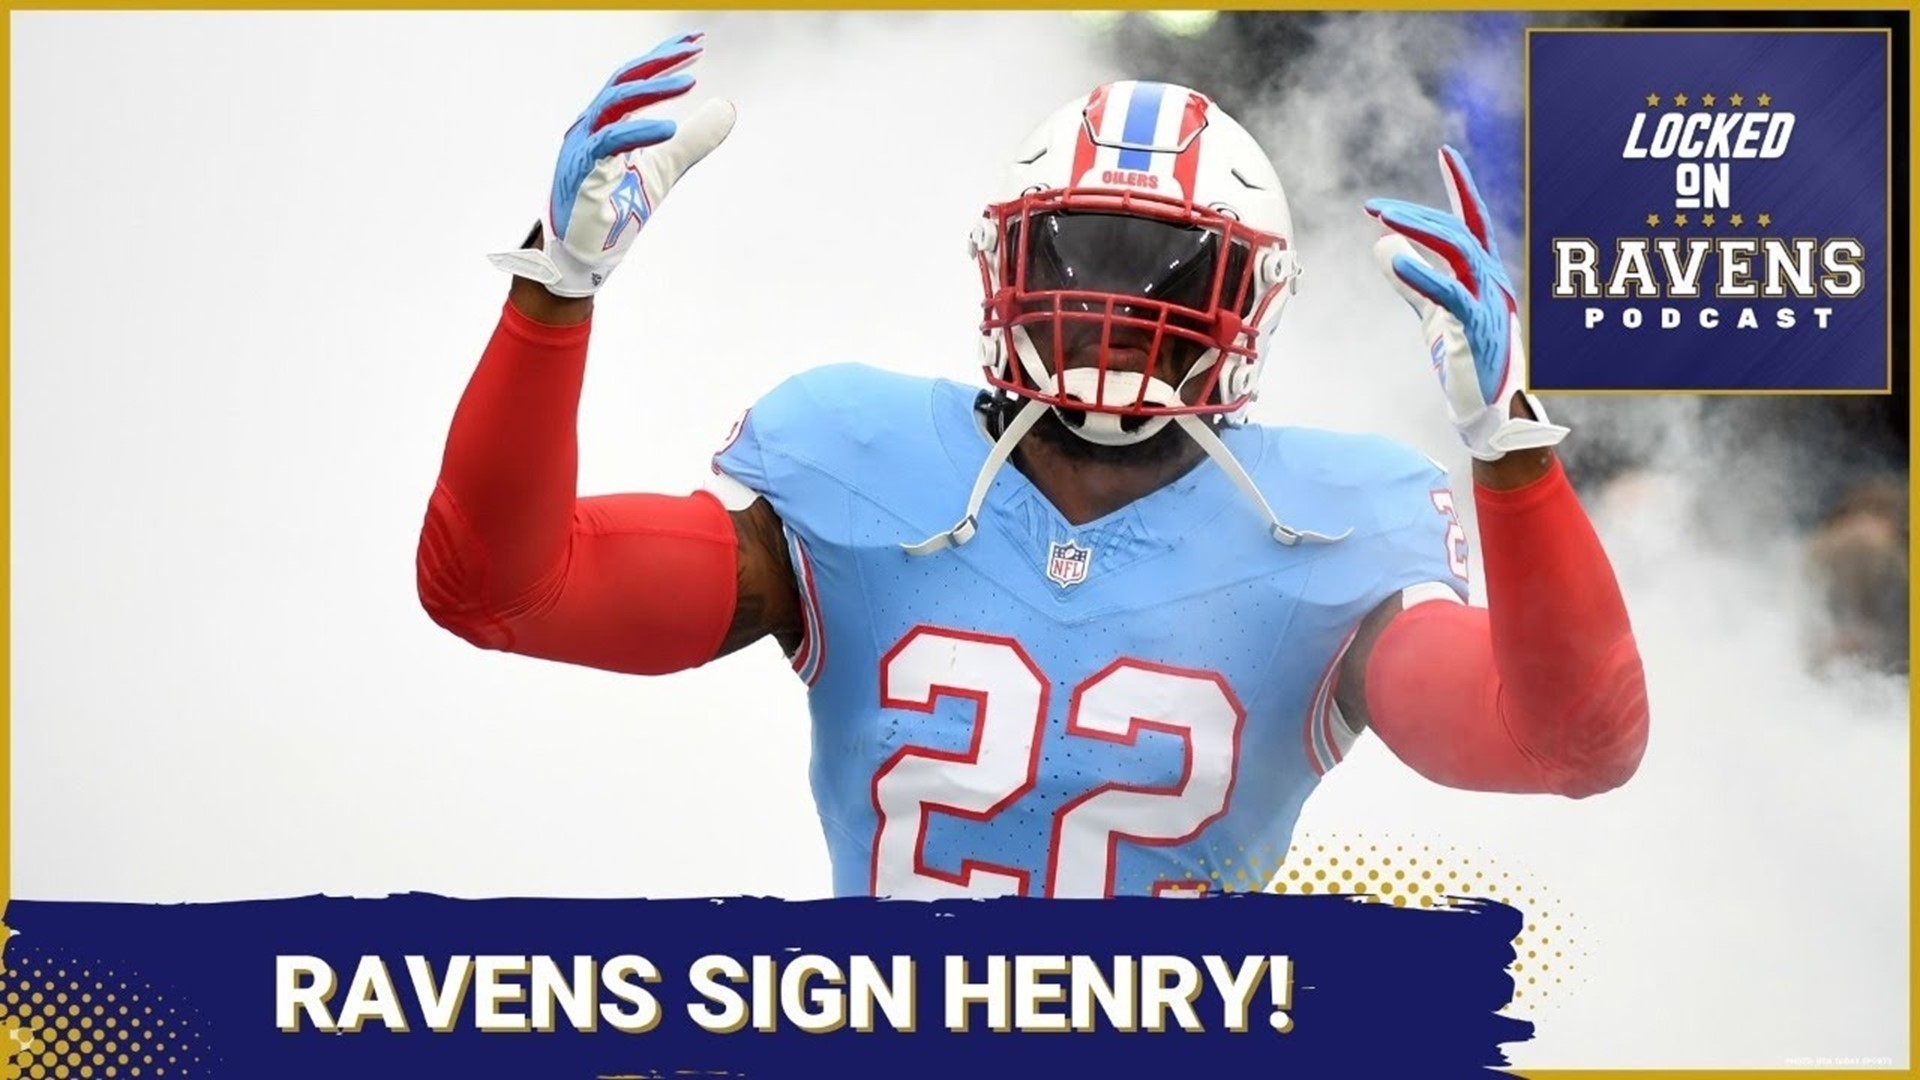 We look at the Baltimore Ravens signing Tennessee Titans RB Derrick Henry, talking about what the move means for the franchise and more.